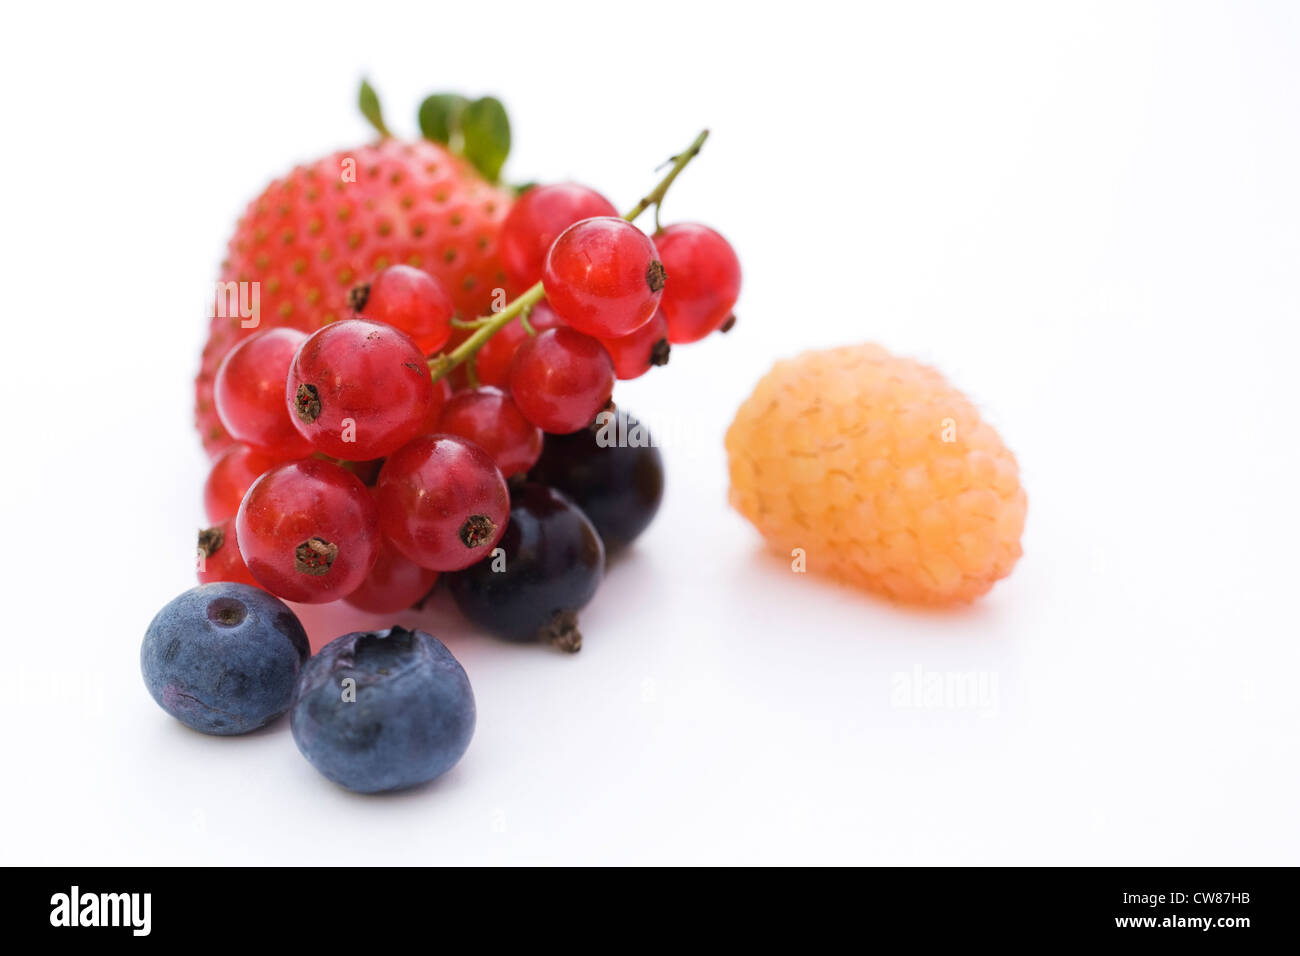 Summer berries on a white background. Stock Photo